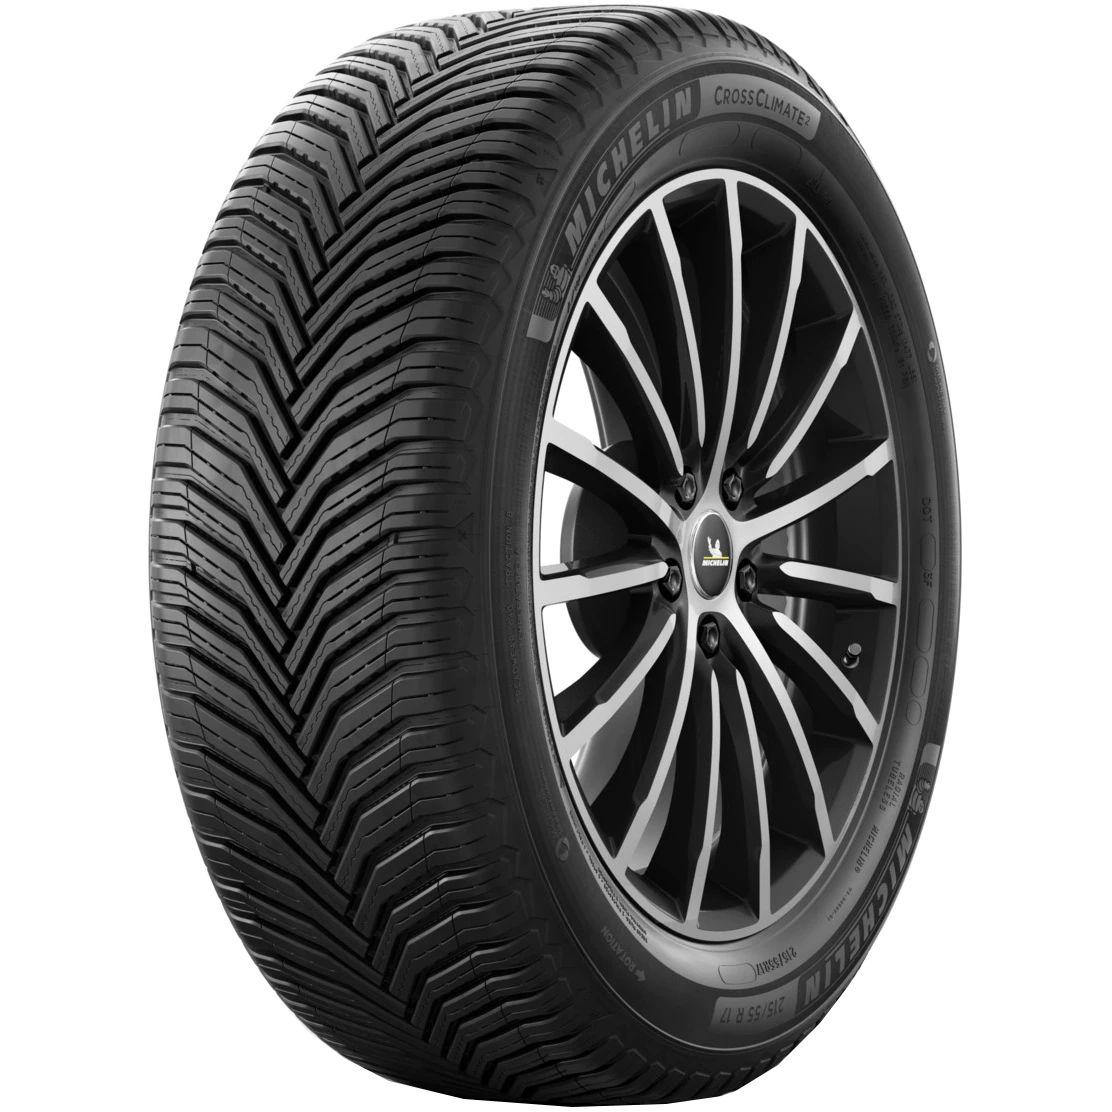 Anvelope all seasons MICHELIN CrossClimate2 M+S XL 245/40 R18 97Y